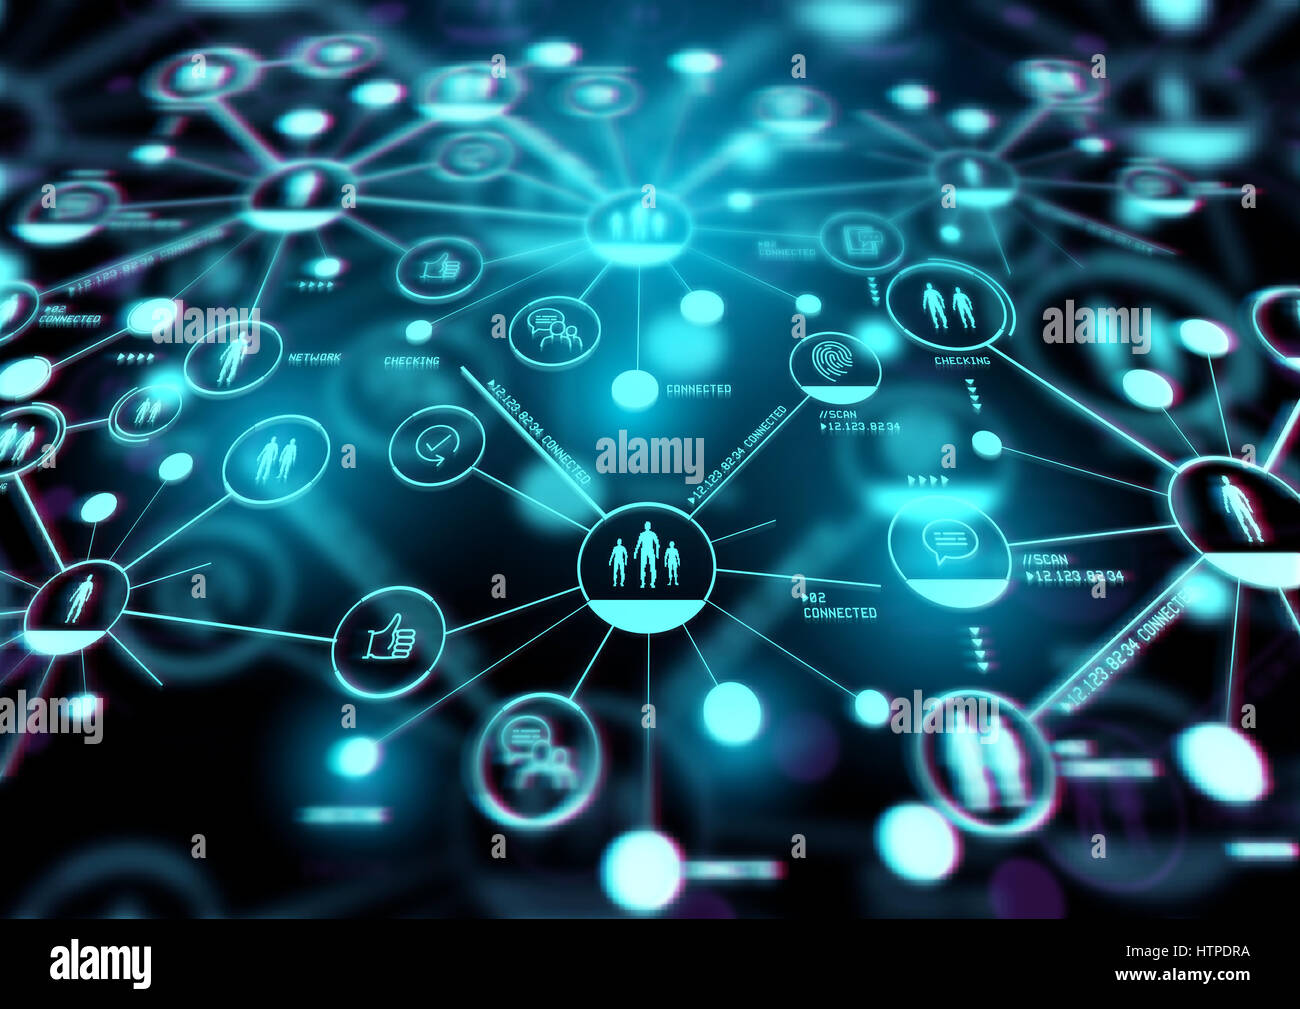 Increasing Connections. A closely connected network of people and technology. Illustration. Stock Photo